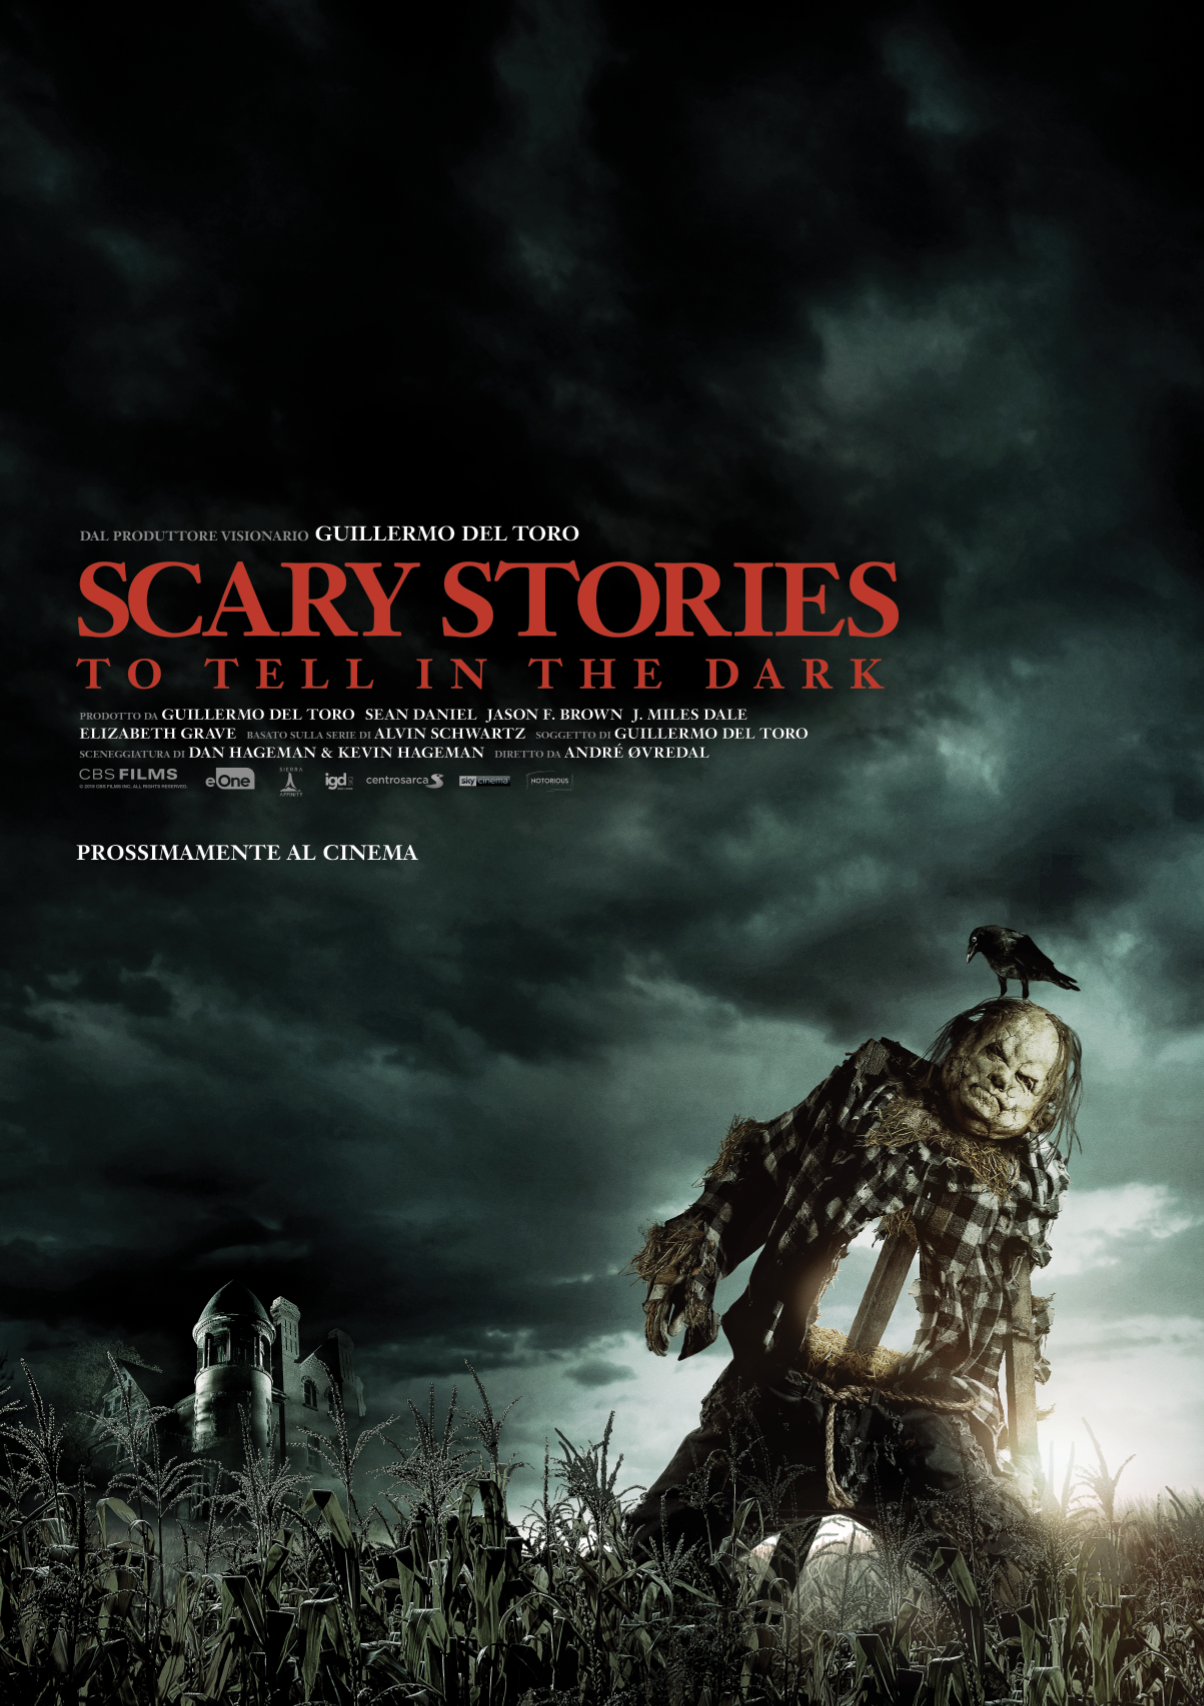 https://movieplayer.it/film/scary-stories-to-tell-in-the-dark_45033/